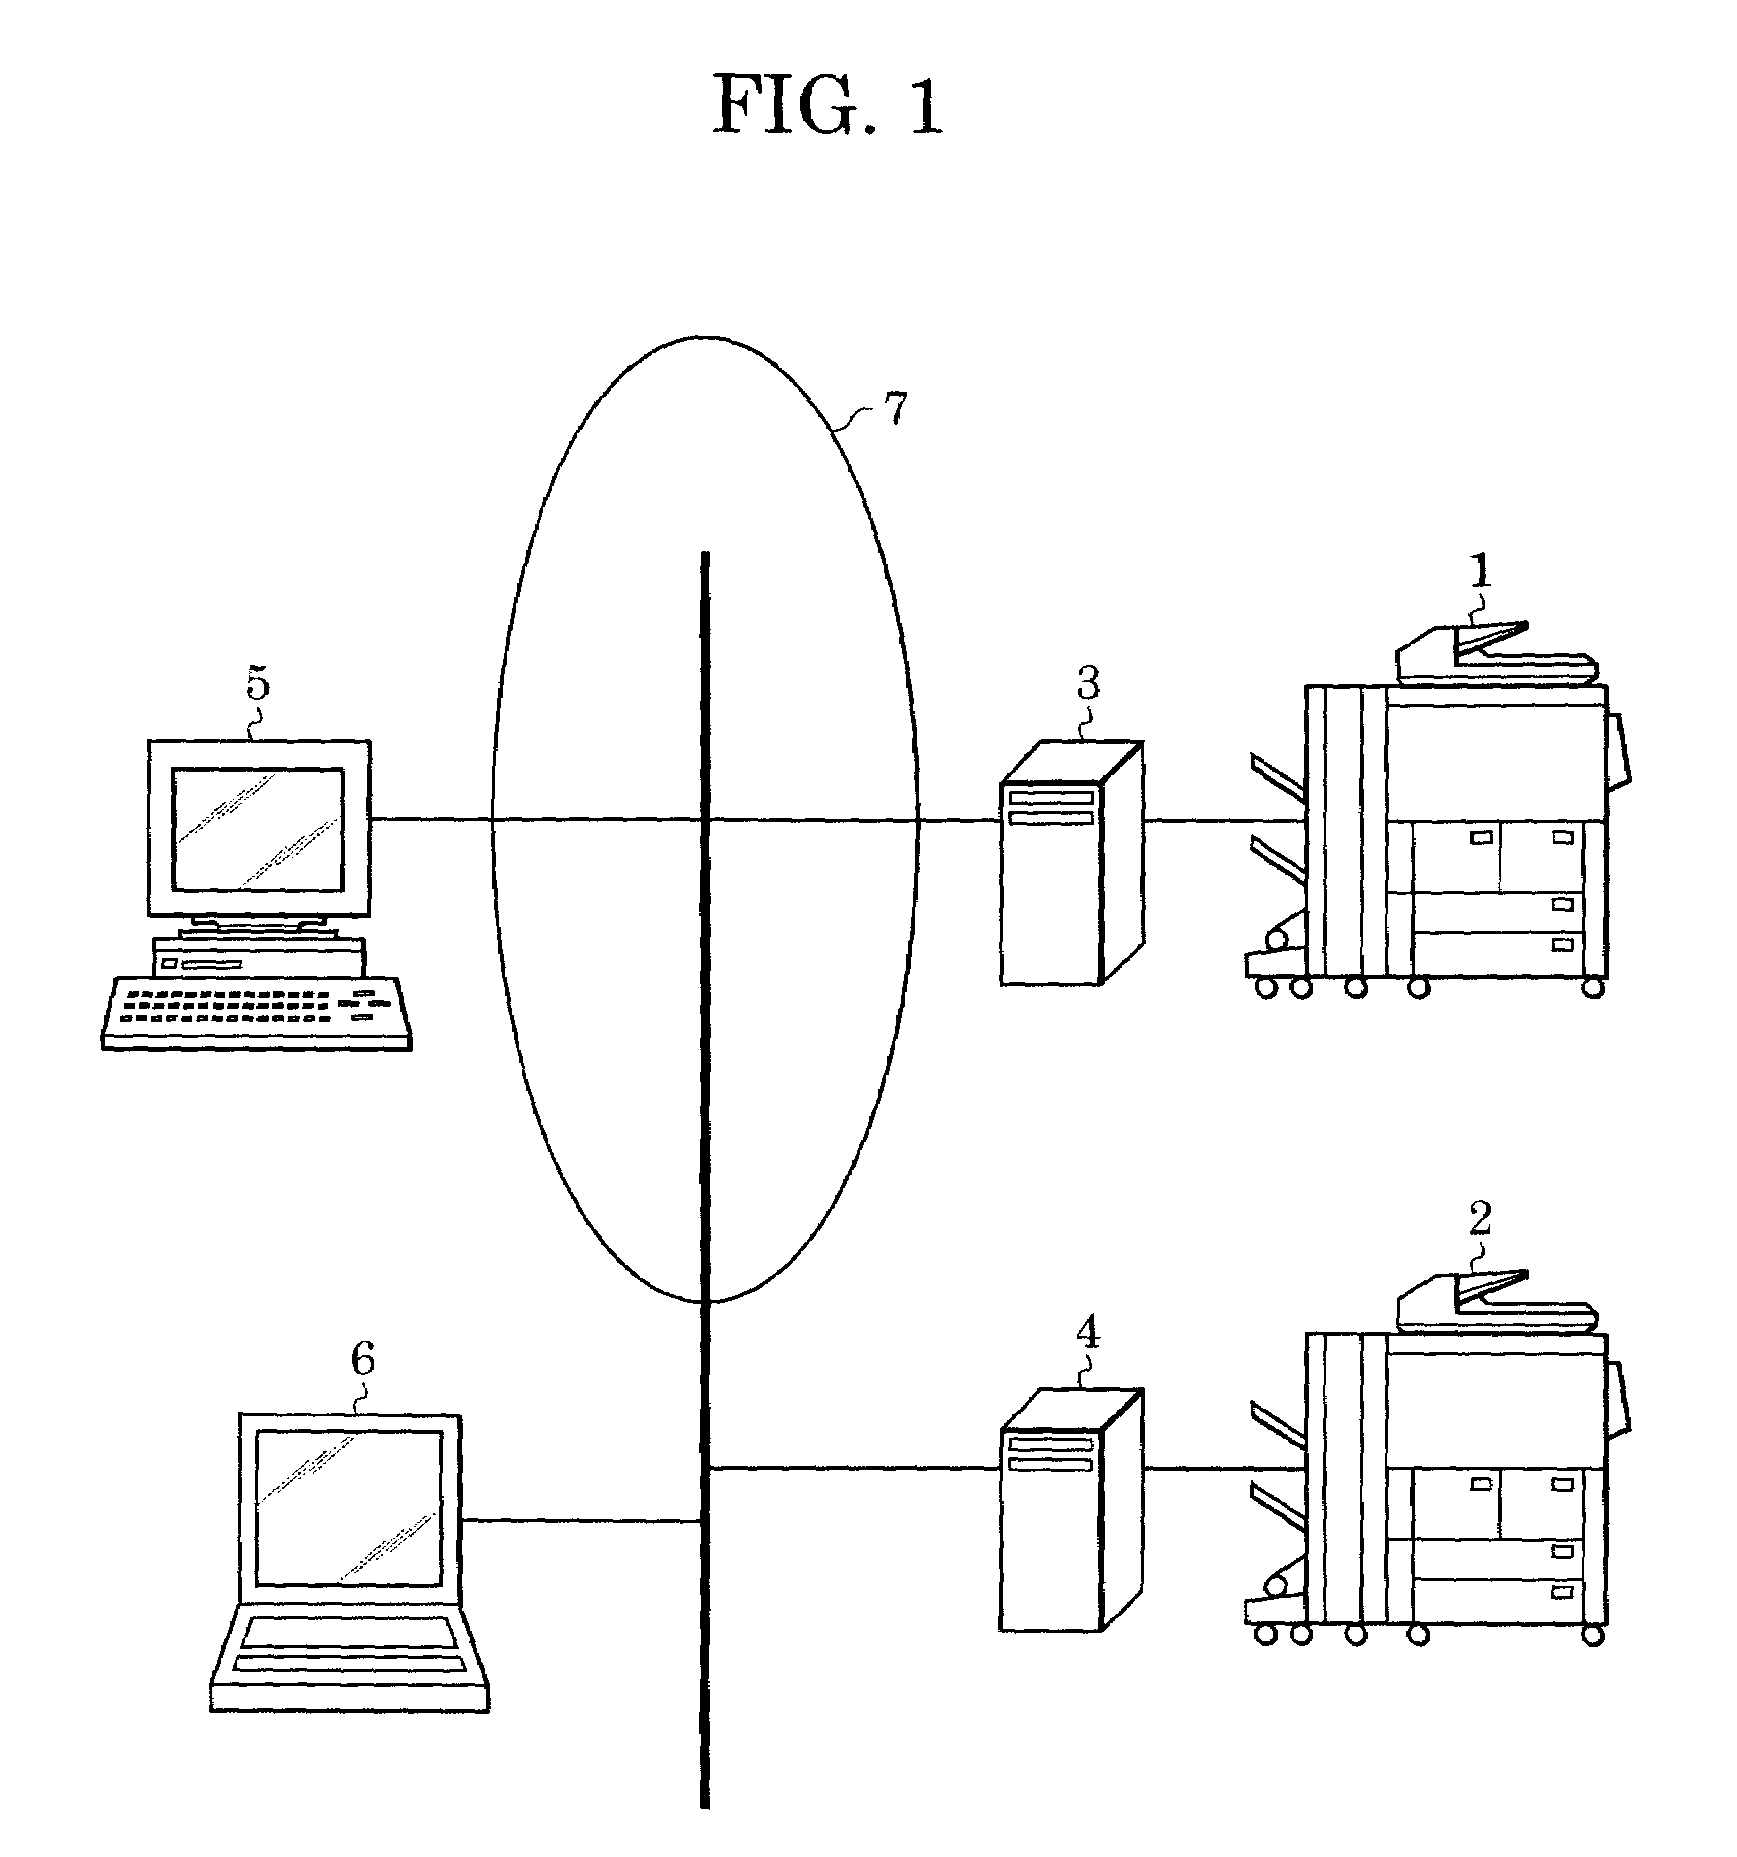 Image processing system and method for processing image data using the system